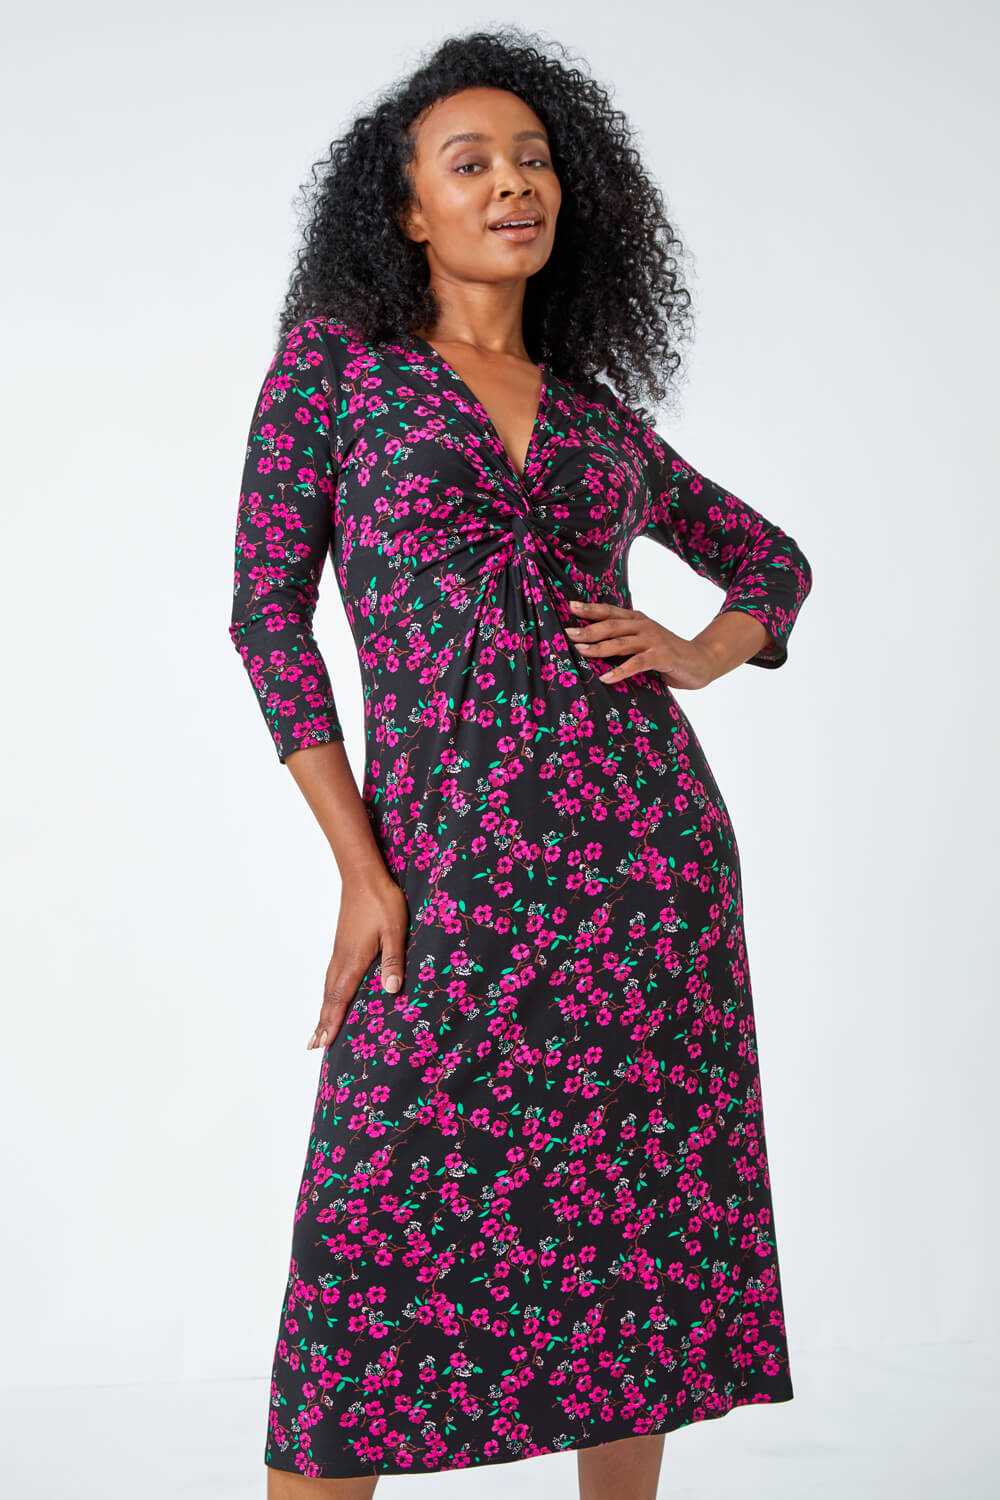 PINK Petite Floral Knot Front Stretch Dress, Image 2 of 5